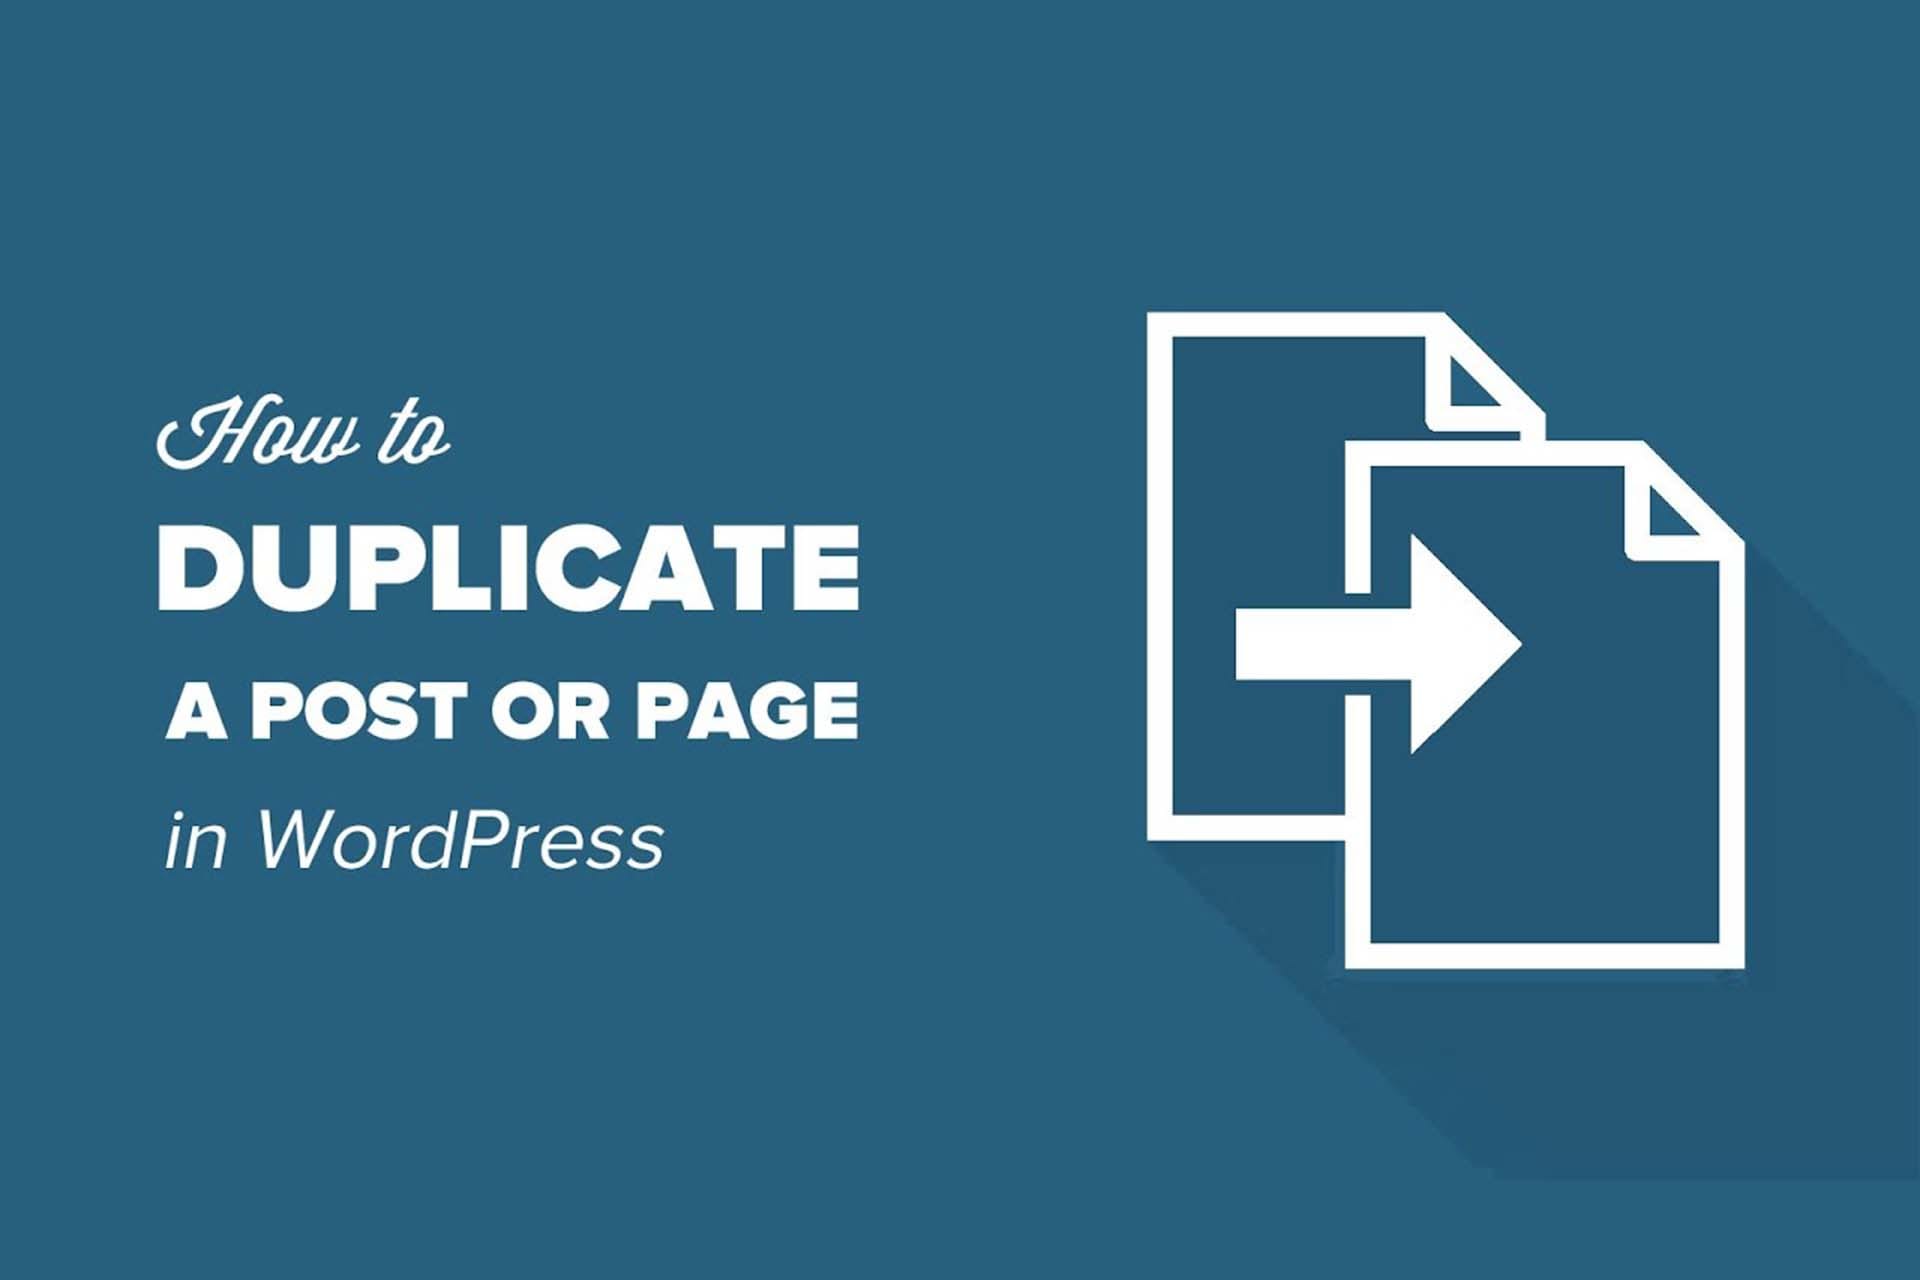 How to duplicate a post or page in wordpress